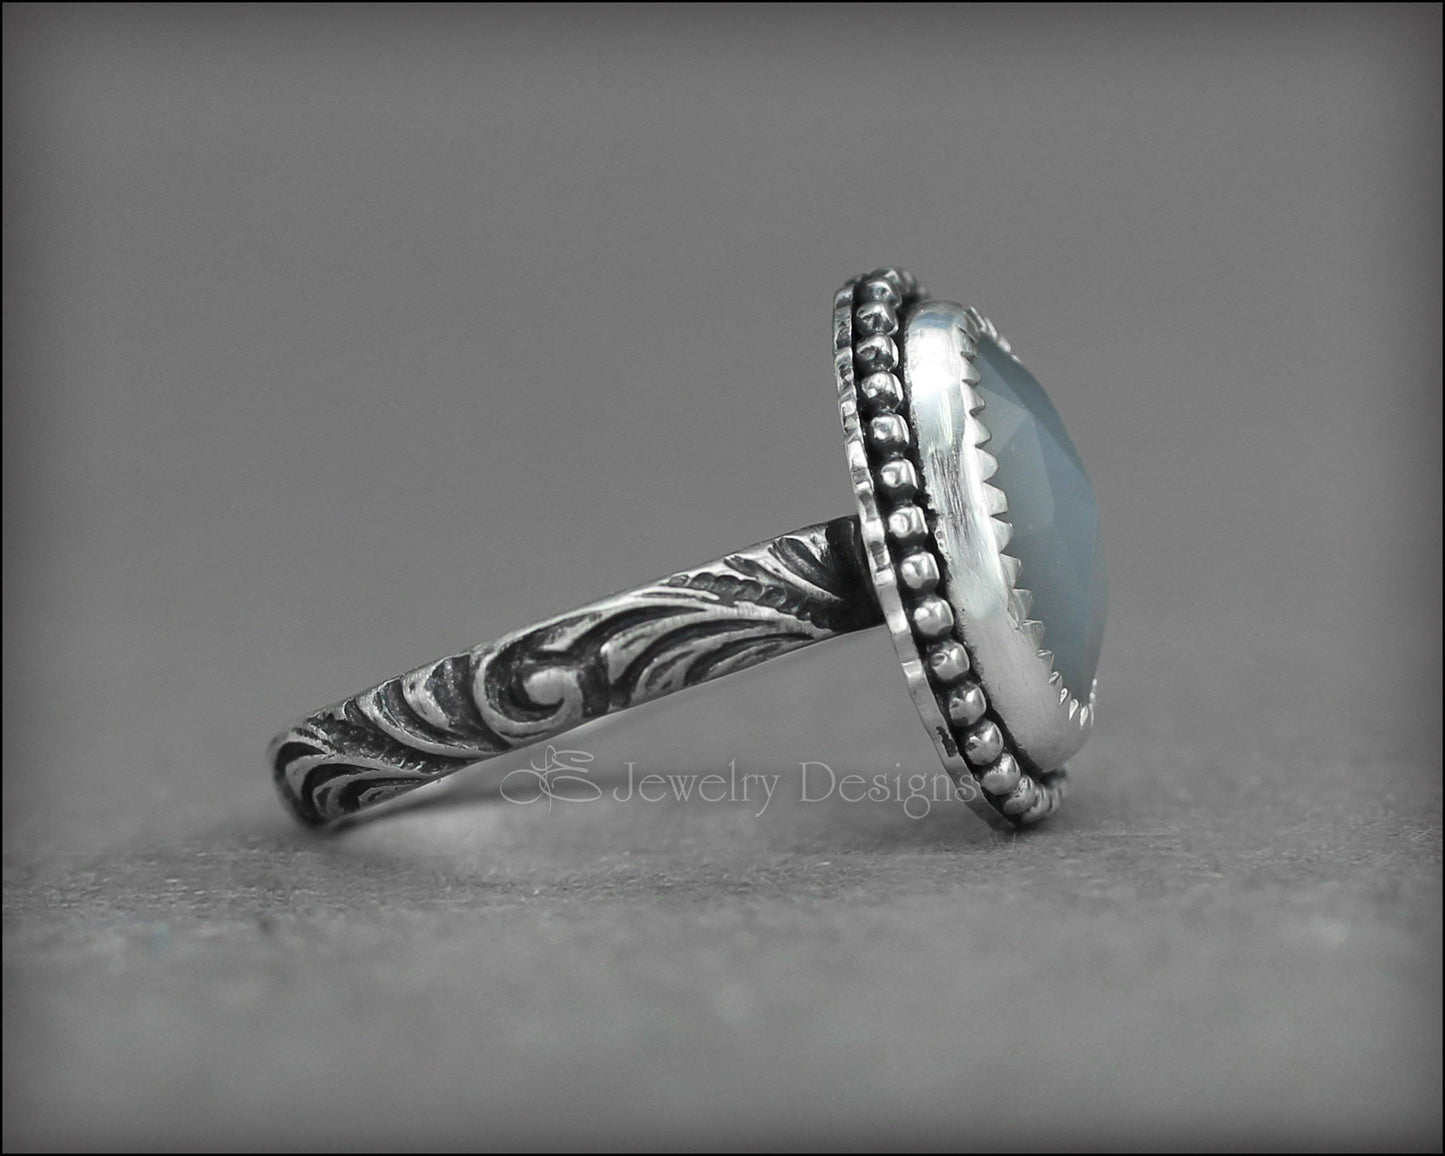 Load image into Gallery viewer, Grey Rose Cut Moonstone Ring - LE Jewelry Designs
